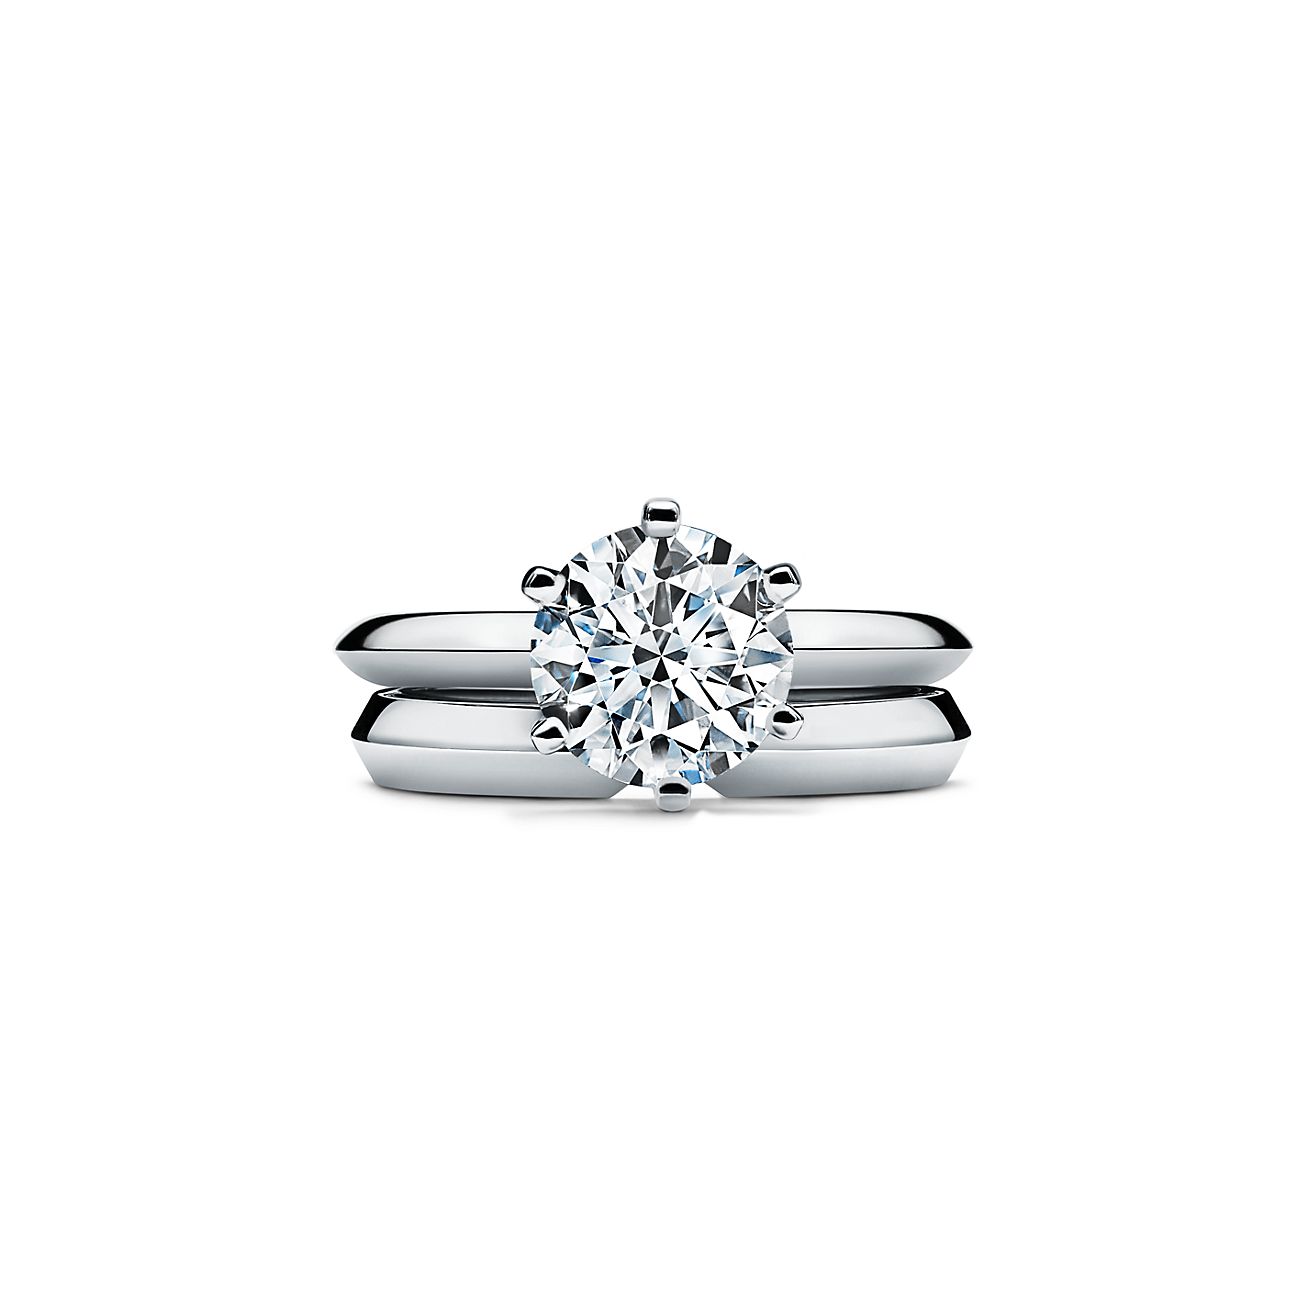 Tiffany Silver Engagement Rings Top Sellers, UP TO 64% OFF | www 